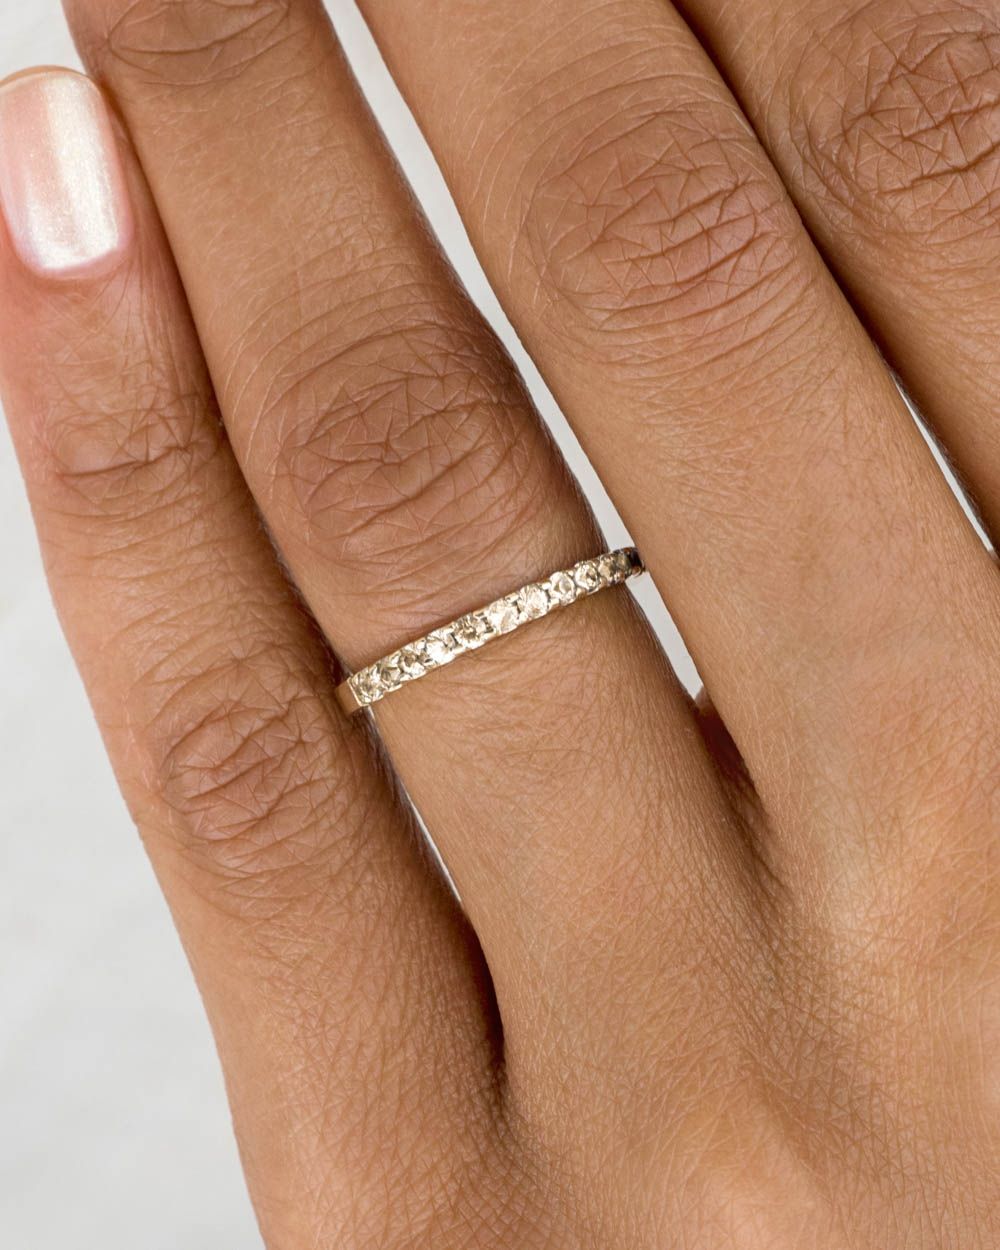 Eternity Half Champagne Diamond Wide Band – Bario Neal Regarding Champagne Diamond Eternity Rings (View 11 of 25)